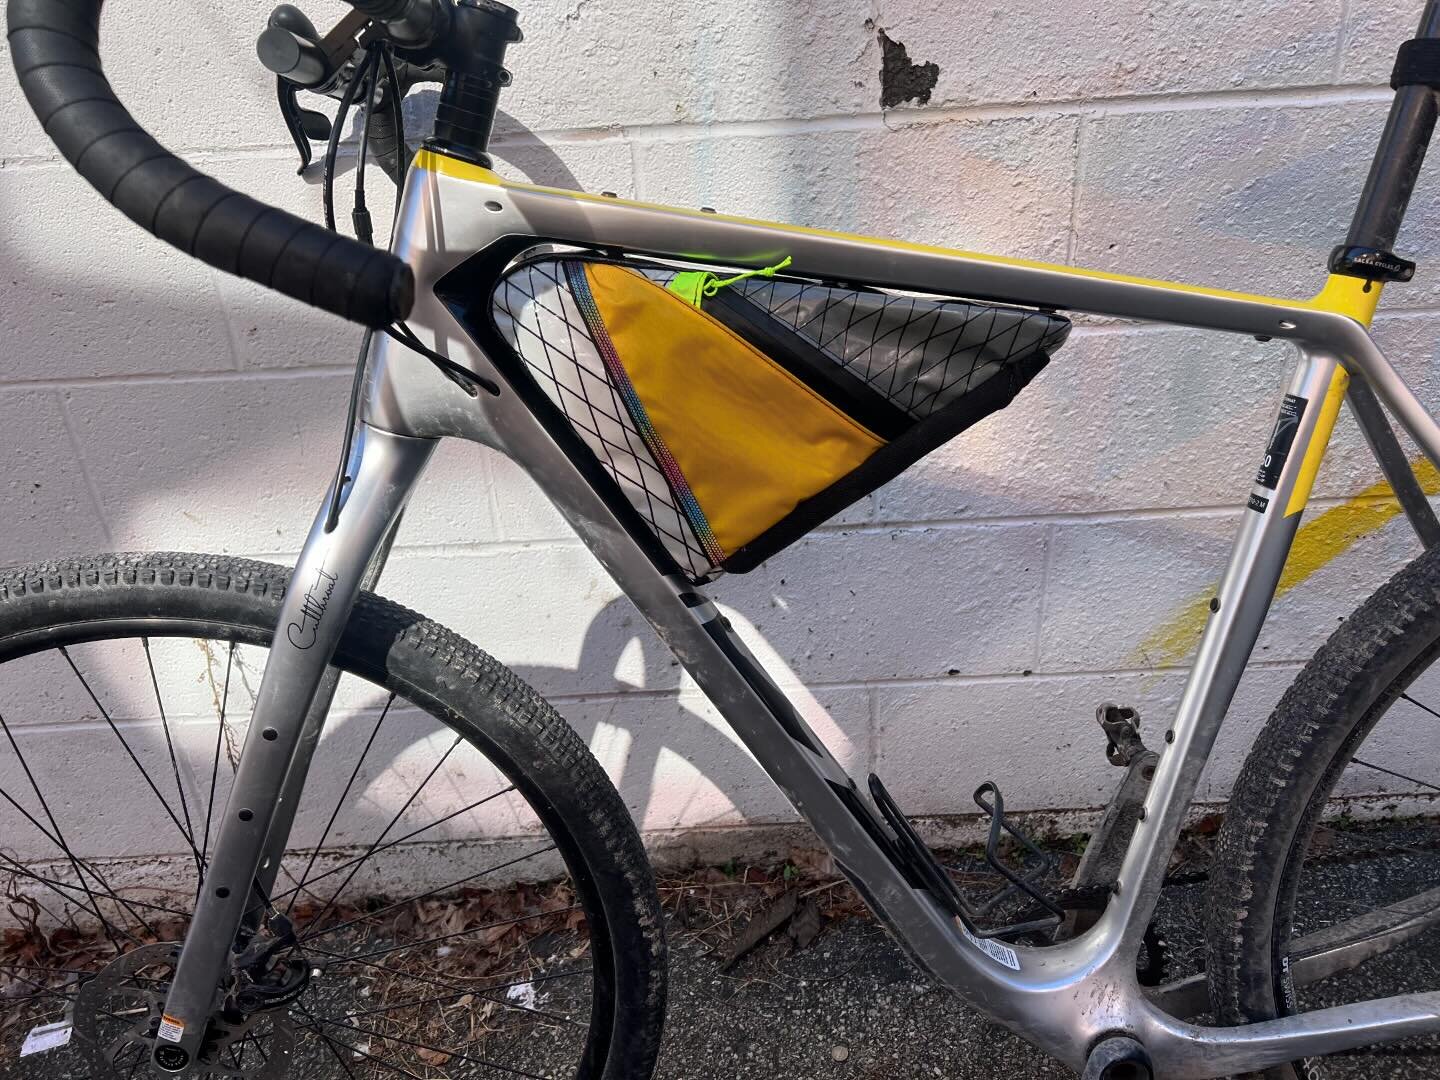 Get ready for spring, dm for details getting your  #custommade #bikepacking #framebag #waterproof materials #madeinusa #sailcloth #gravelbike #mountainbike . BTW Cage mount bags are a special challenge. Slide into our new online shop and see the show